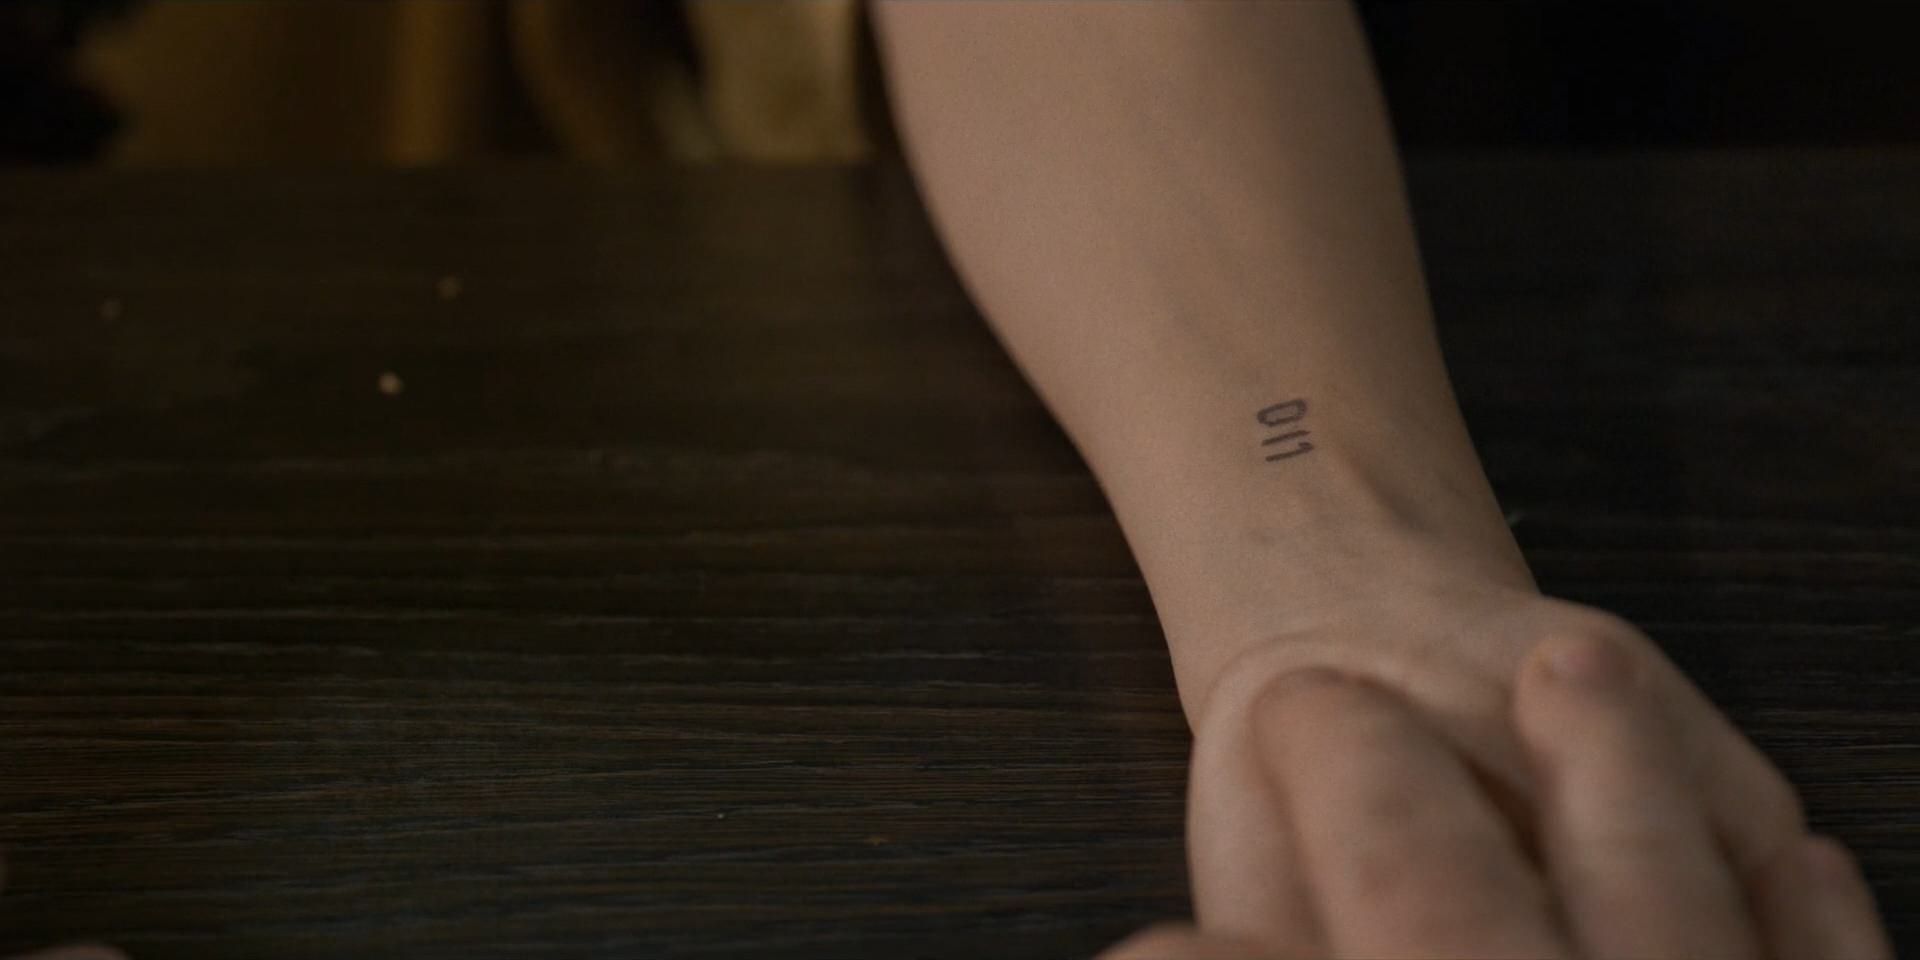 Elevens Number Tattoo in Stranger Things